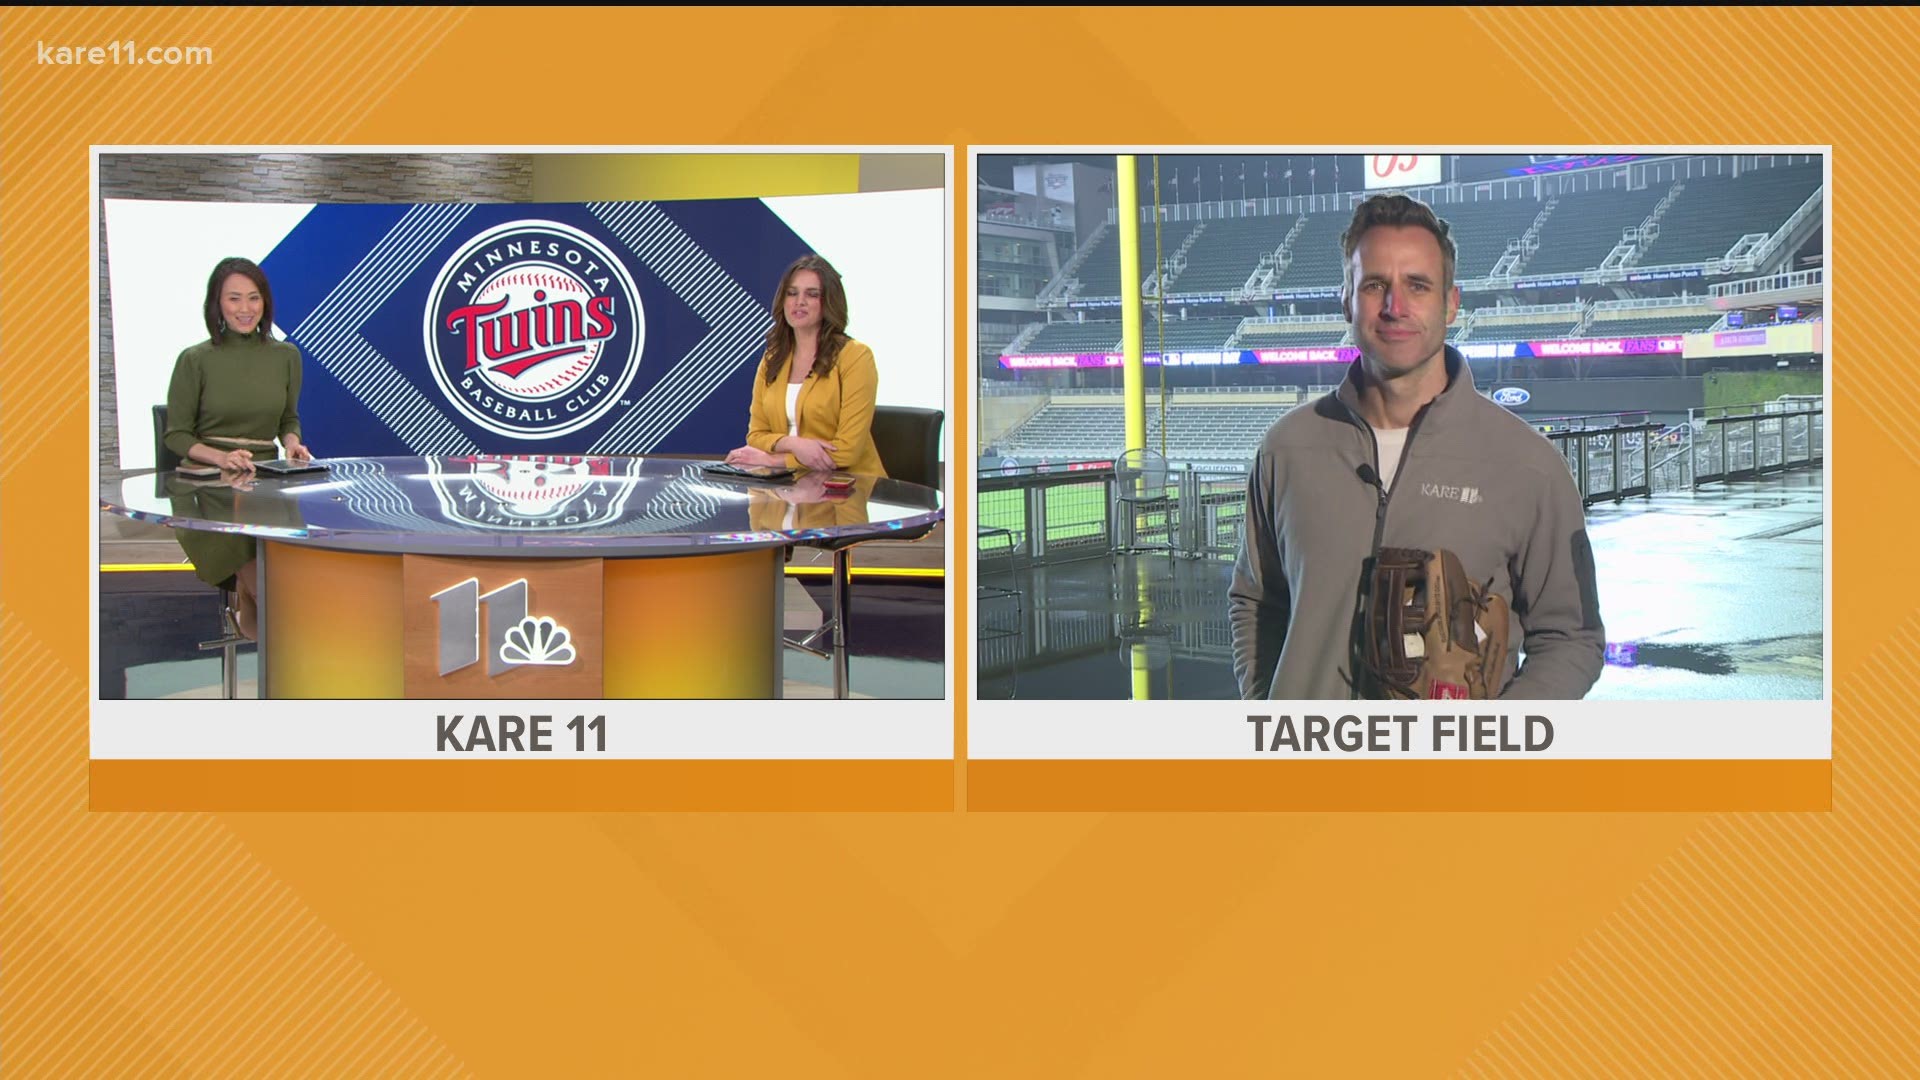 Enhanced cleaning technology is just one of the new things you'll see at Target Field this season